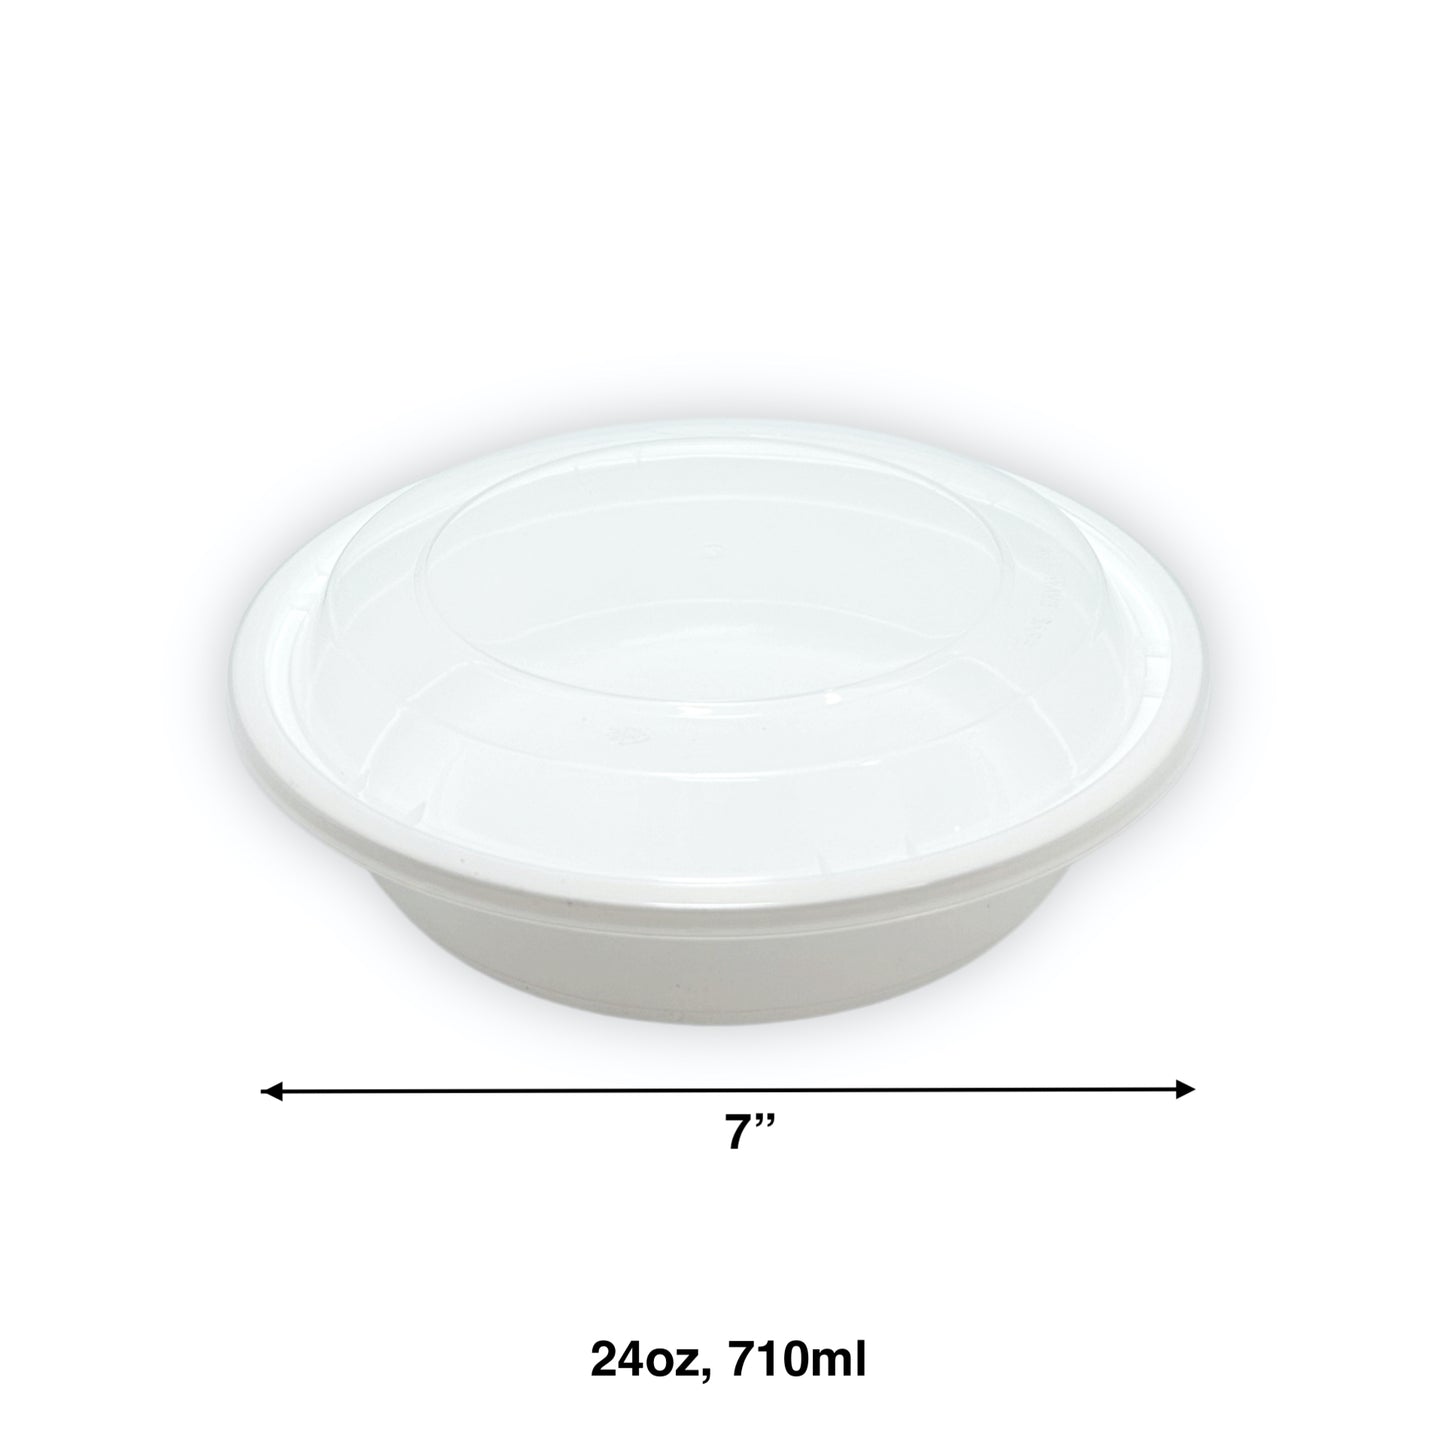 KIS-RS24G | 150sets 24oz, 710ml White PP Round 7" Container with Clear Lids Combo; $0.196/set